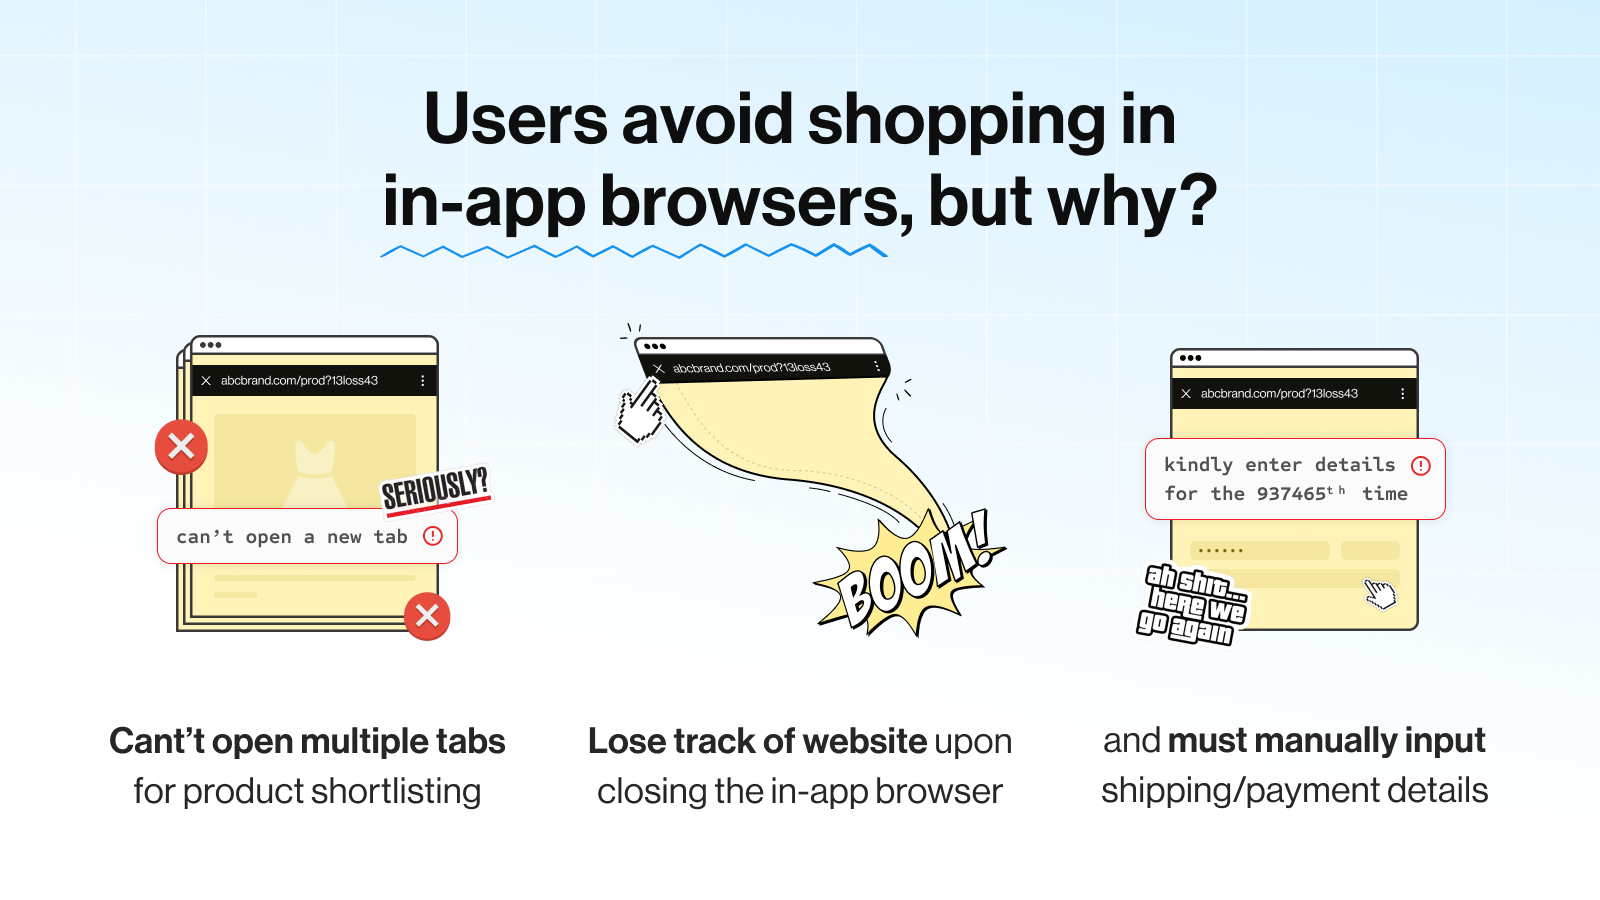 Why conversions are lower in in-app browser?